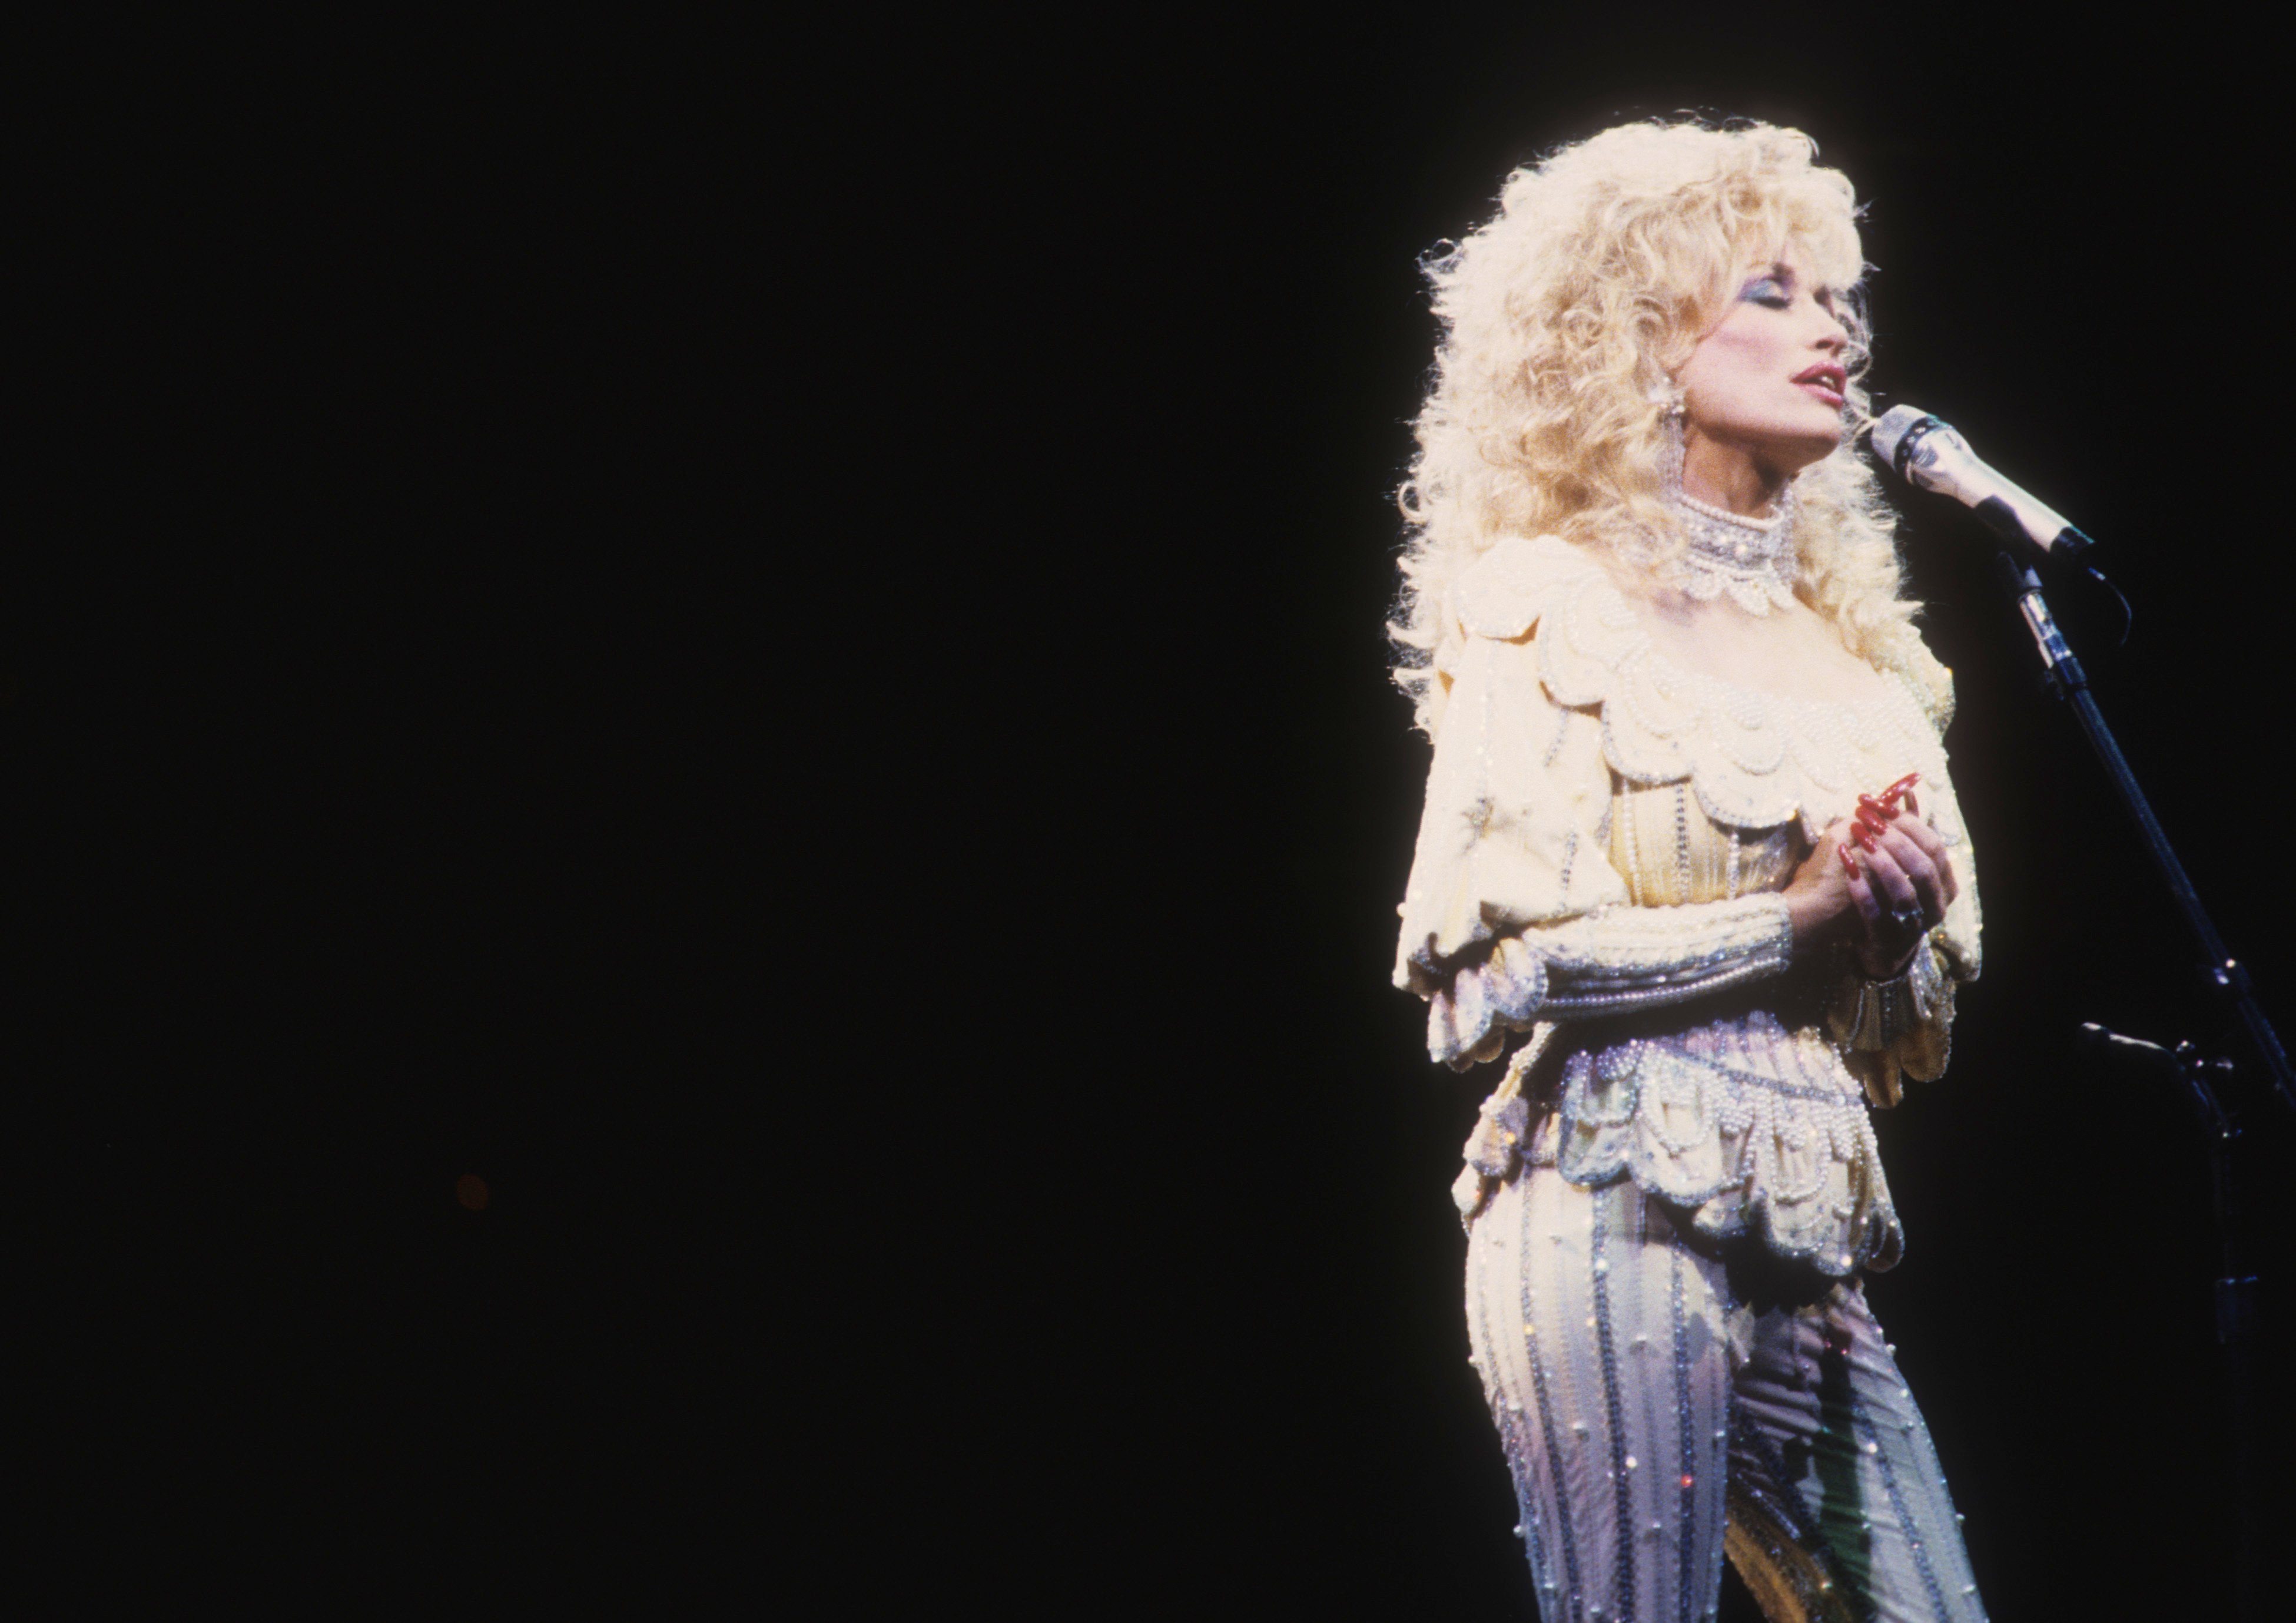 Dolly Parton performs at the Target Center in Minneapolis, Minnesota on October 29, 1990.